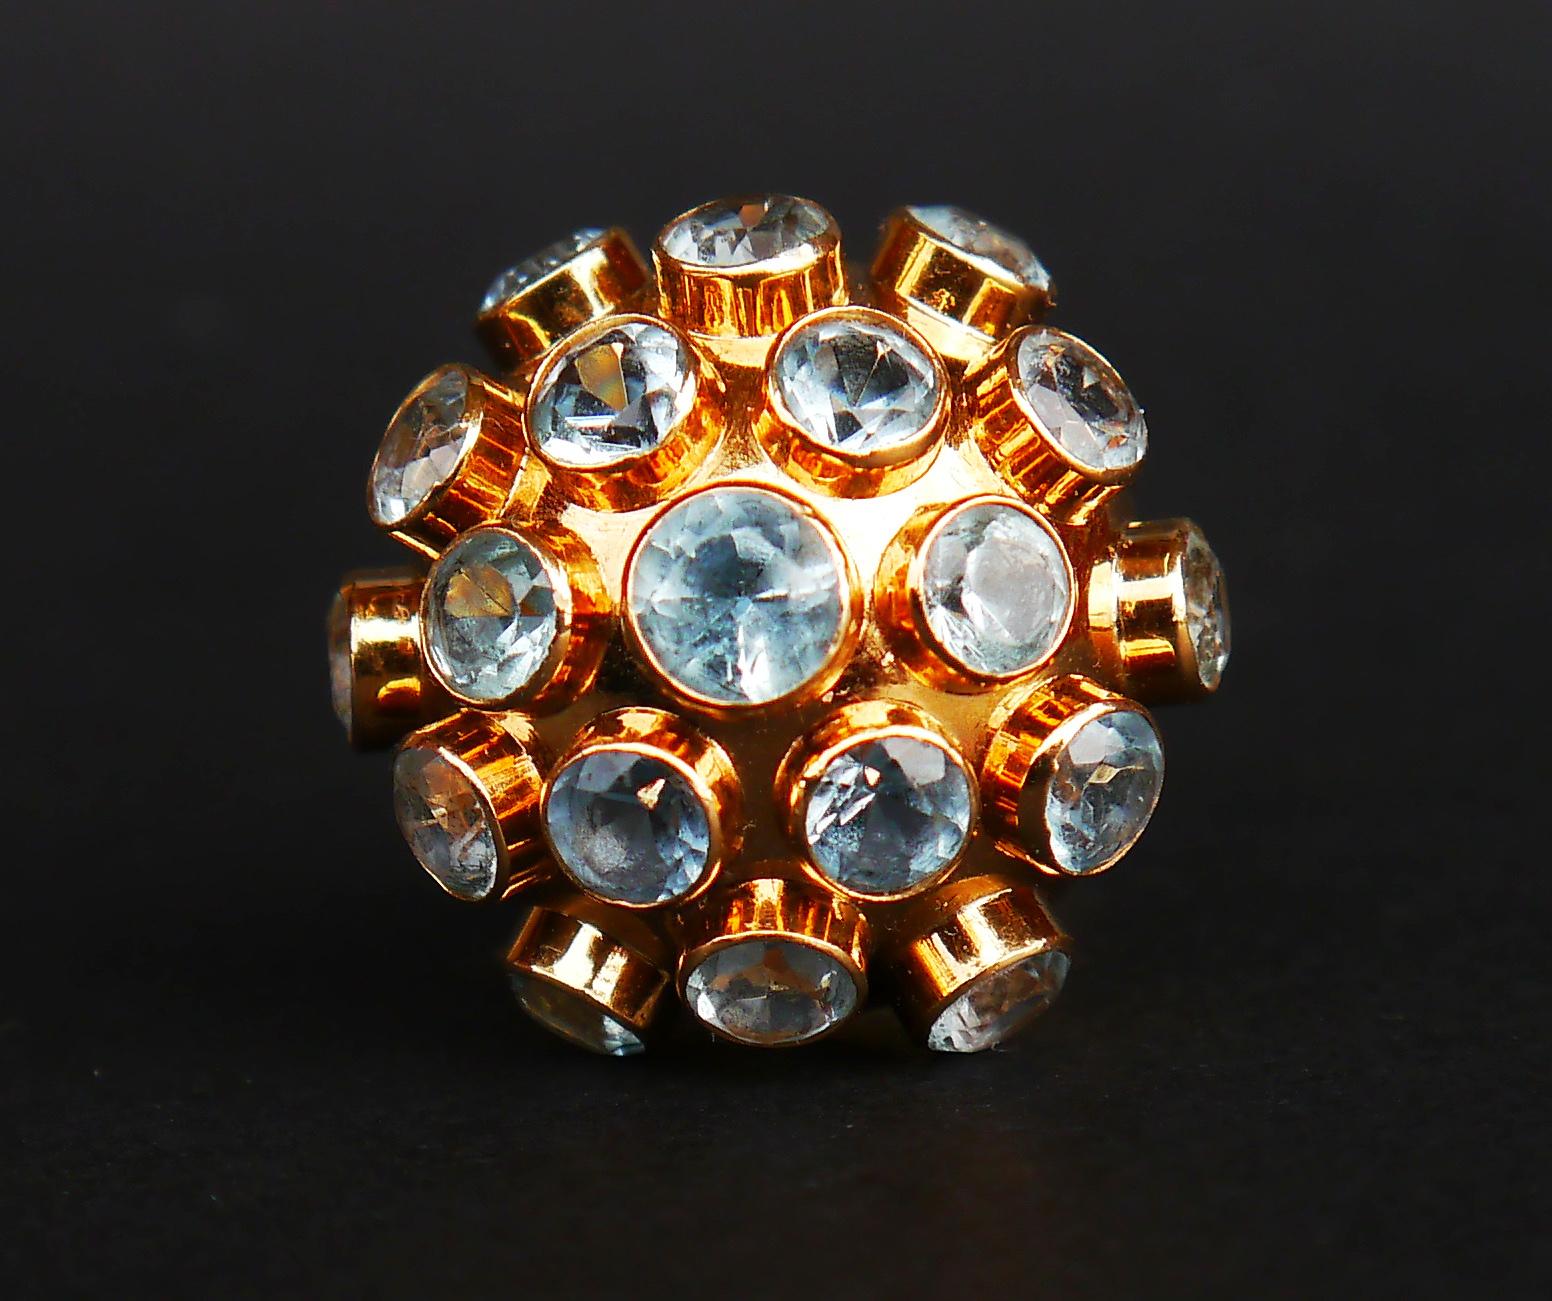 Retro cocktail Sputnik type ring of Fancy design, very unusually looking ring !

Likely manufactured by H.Stern, Brazil. 18K hallmarks . Metal parts in solid 18K (tested) Yellow Gold

Measurements : dome is Ø 23 mm. 19 bezel set diamond cut natural